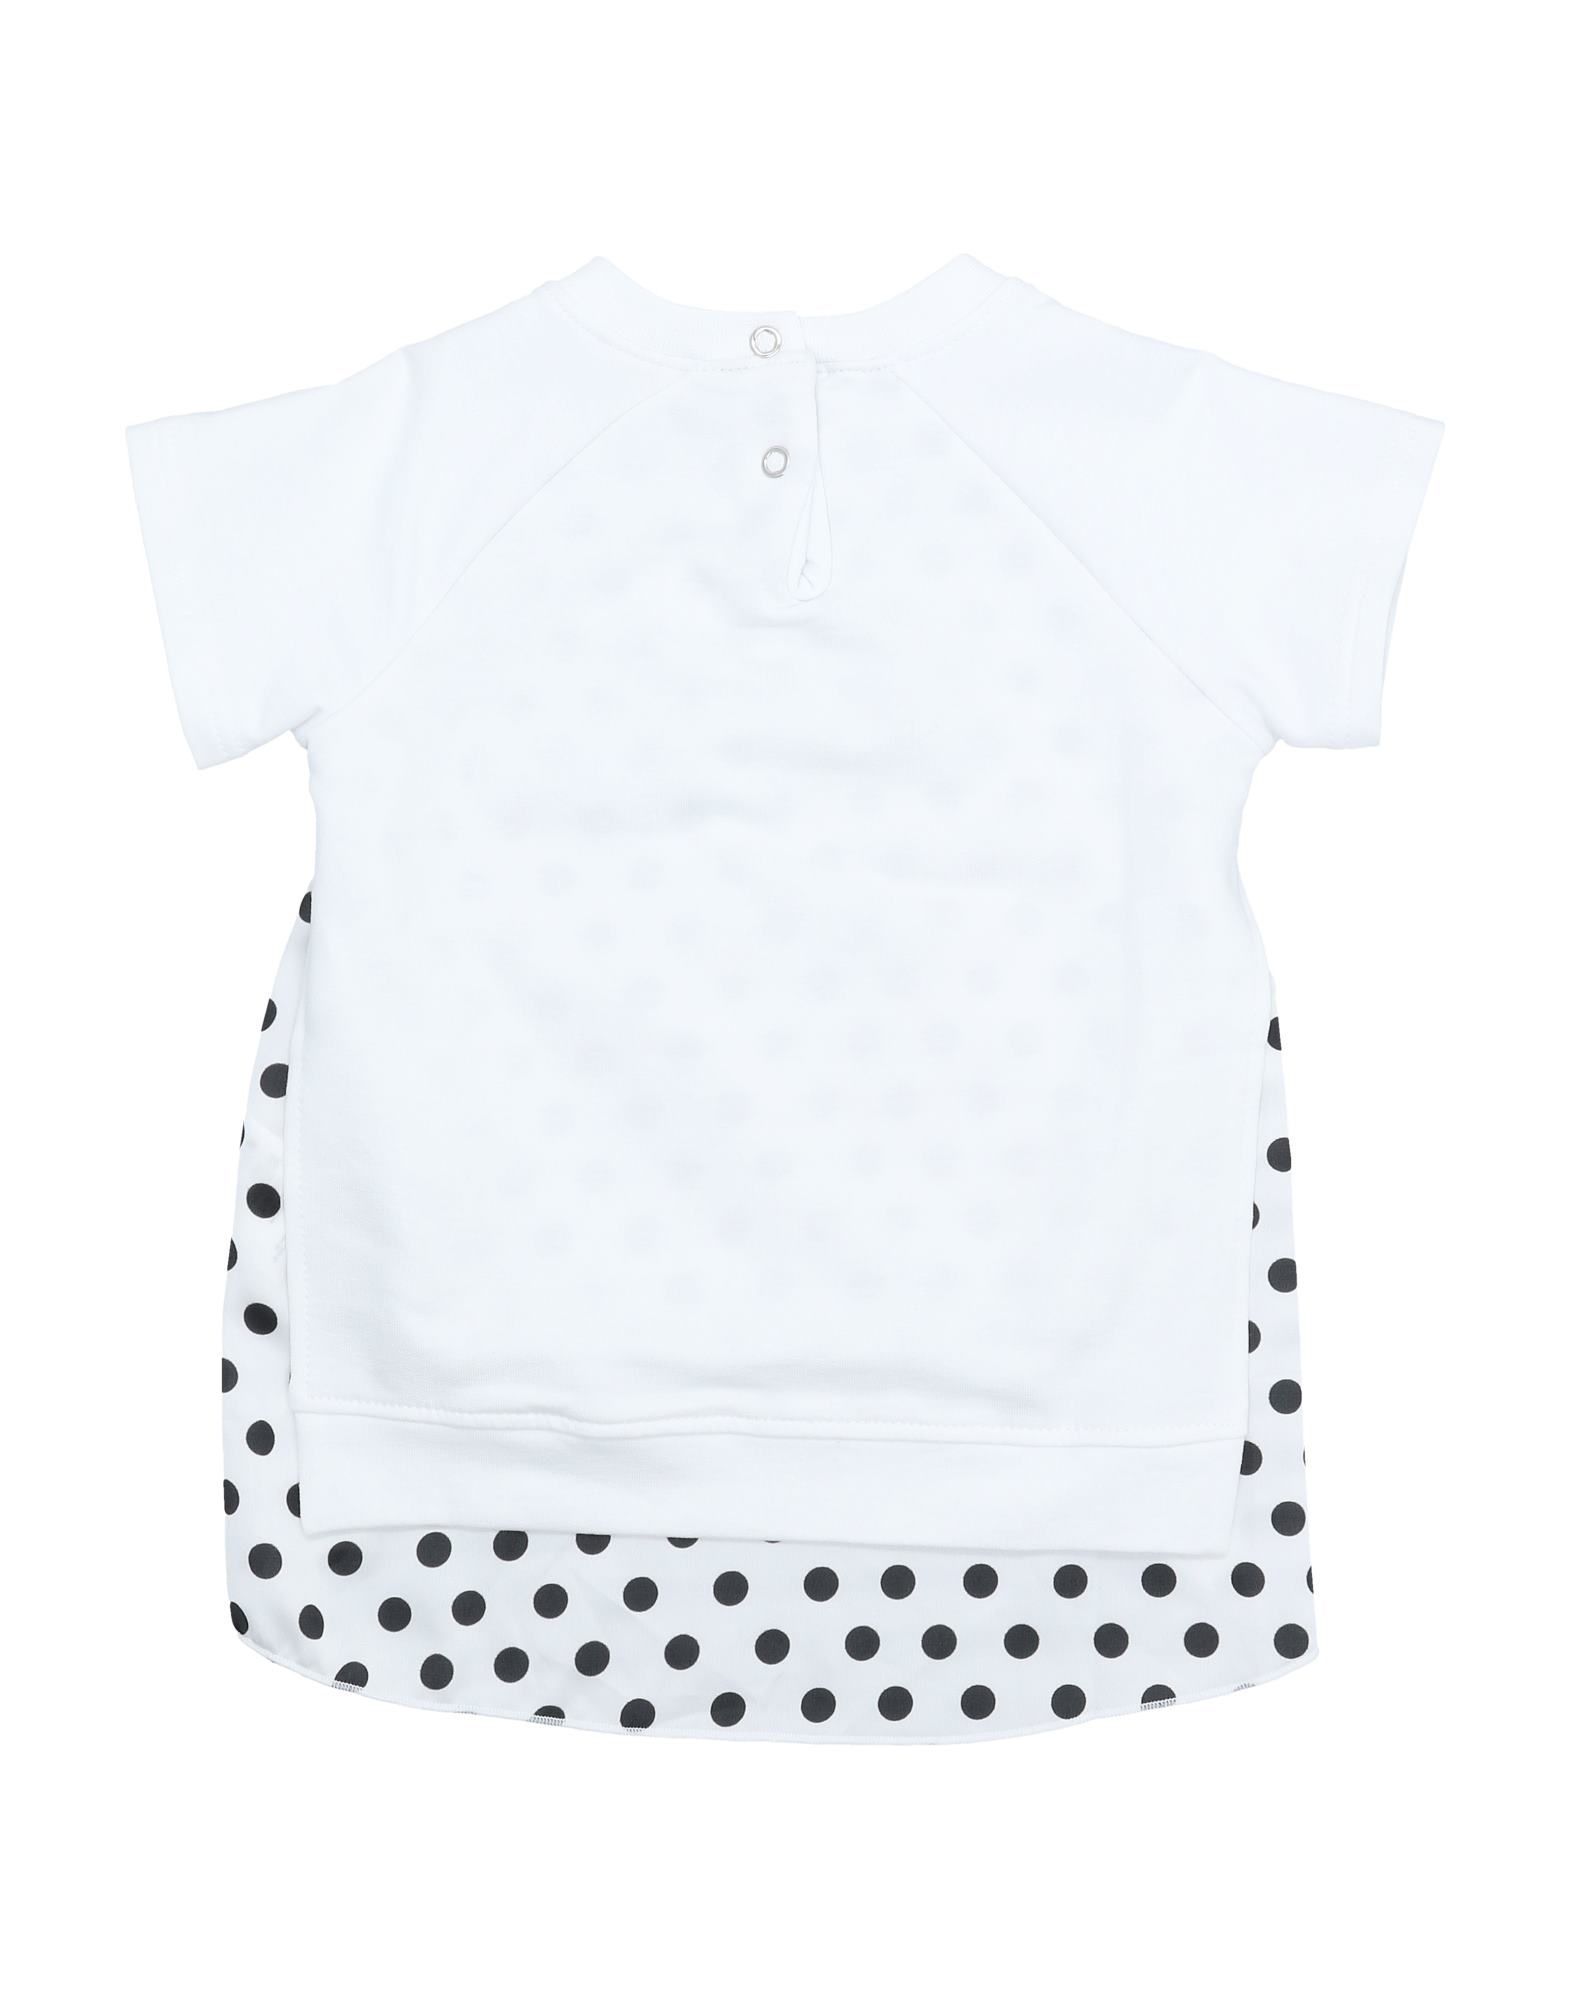 satin, rhinestones, print, polka dots, round collar, short sleeves, snap button fastening, no pockets, stretch, french terry lining, wash at 30° c, do not dry clean, iron at 110° c max, do not bleach, do not tumble dry